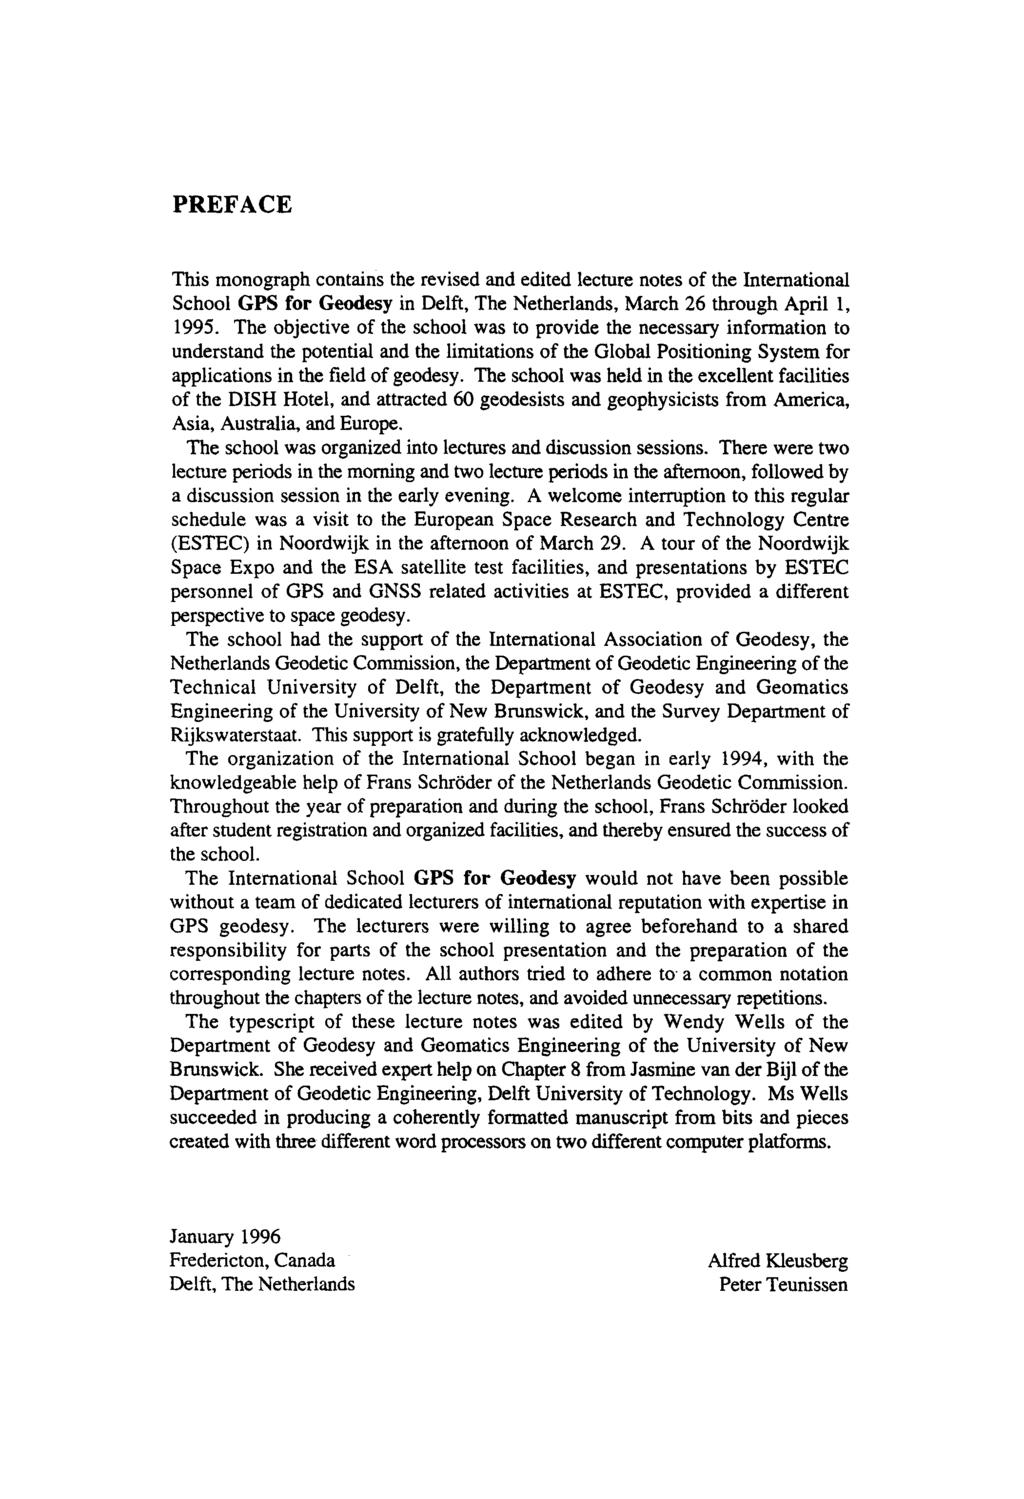 PREFACE This monograph contains the revised and edited lecture notes of the International School GPS for Geodesy in Delft, The Netherlands, March 26 through April 1, 1995.